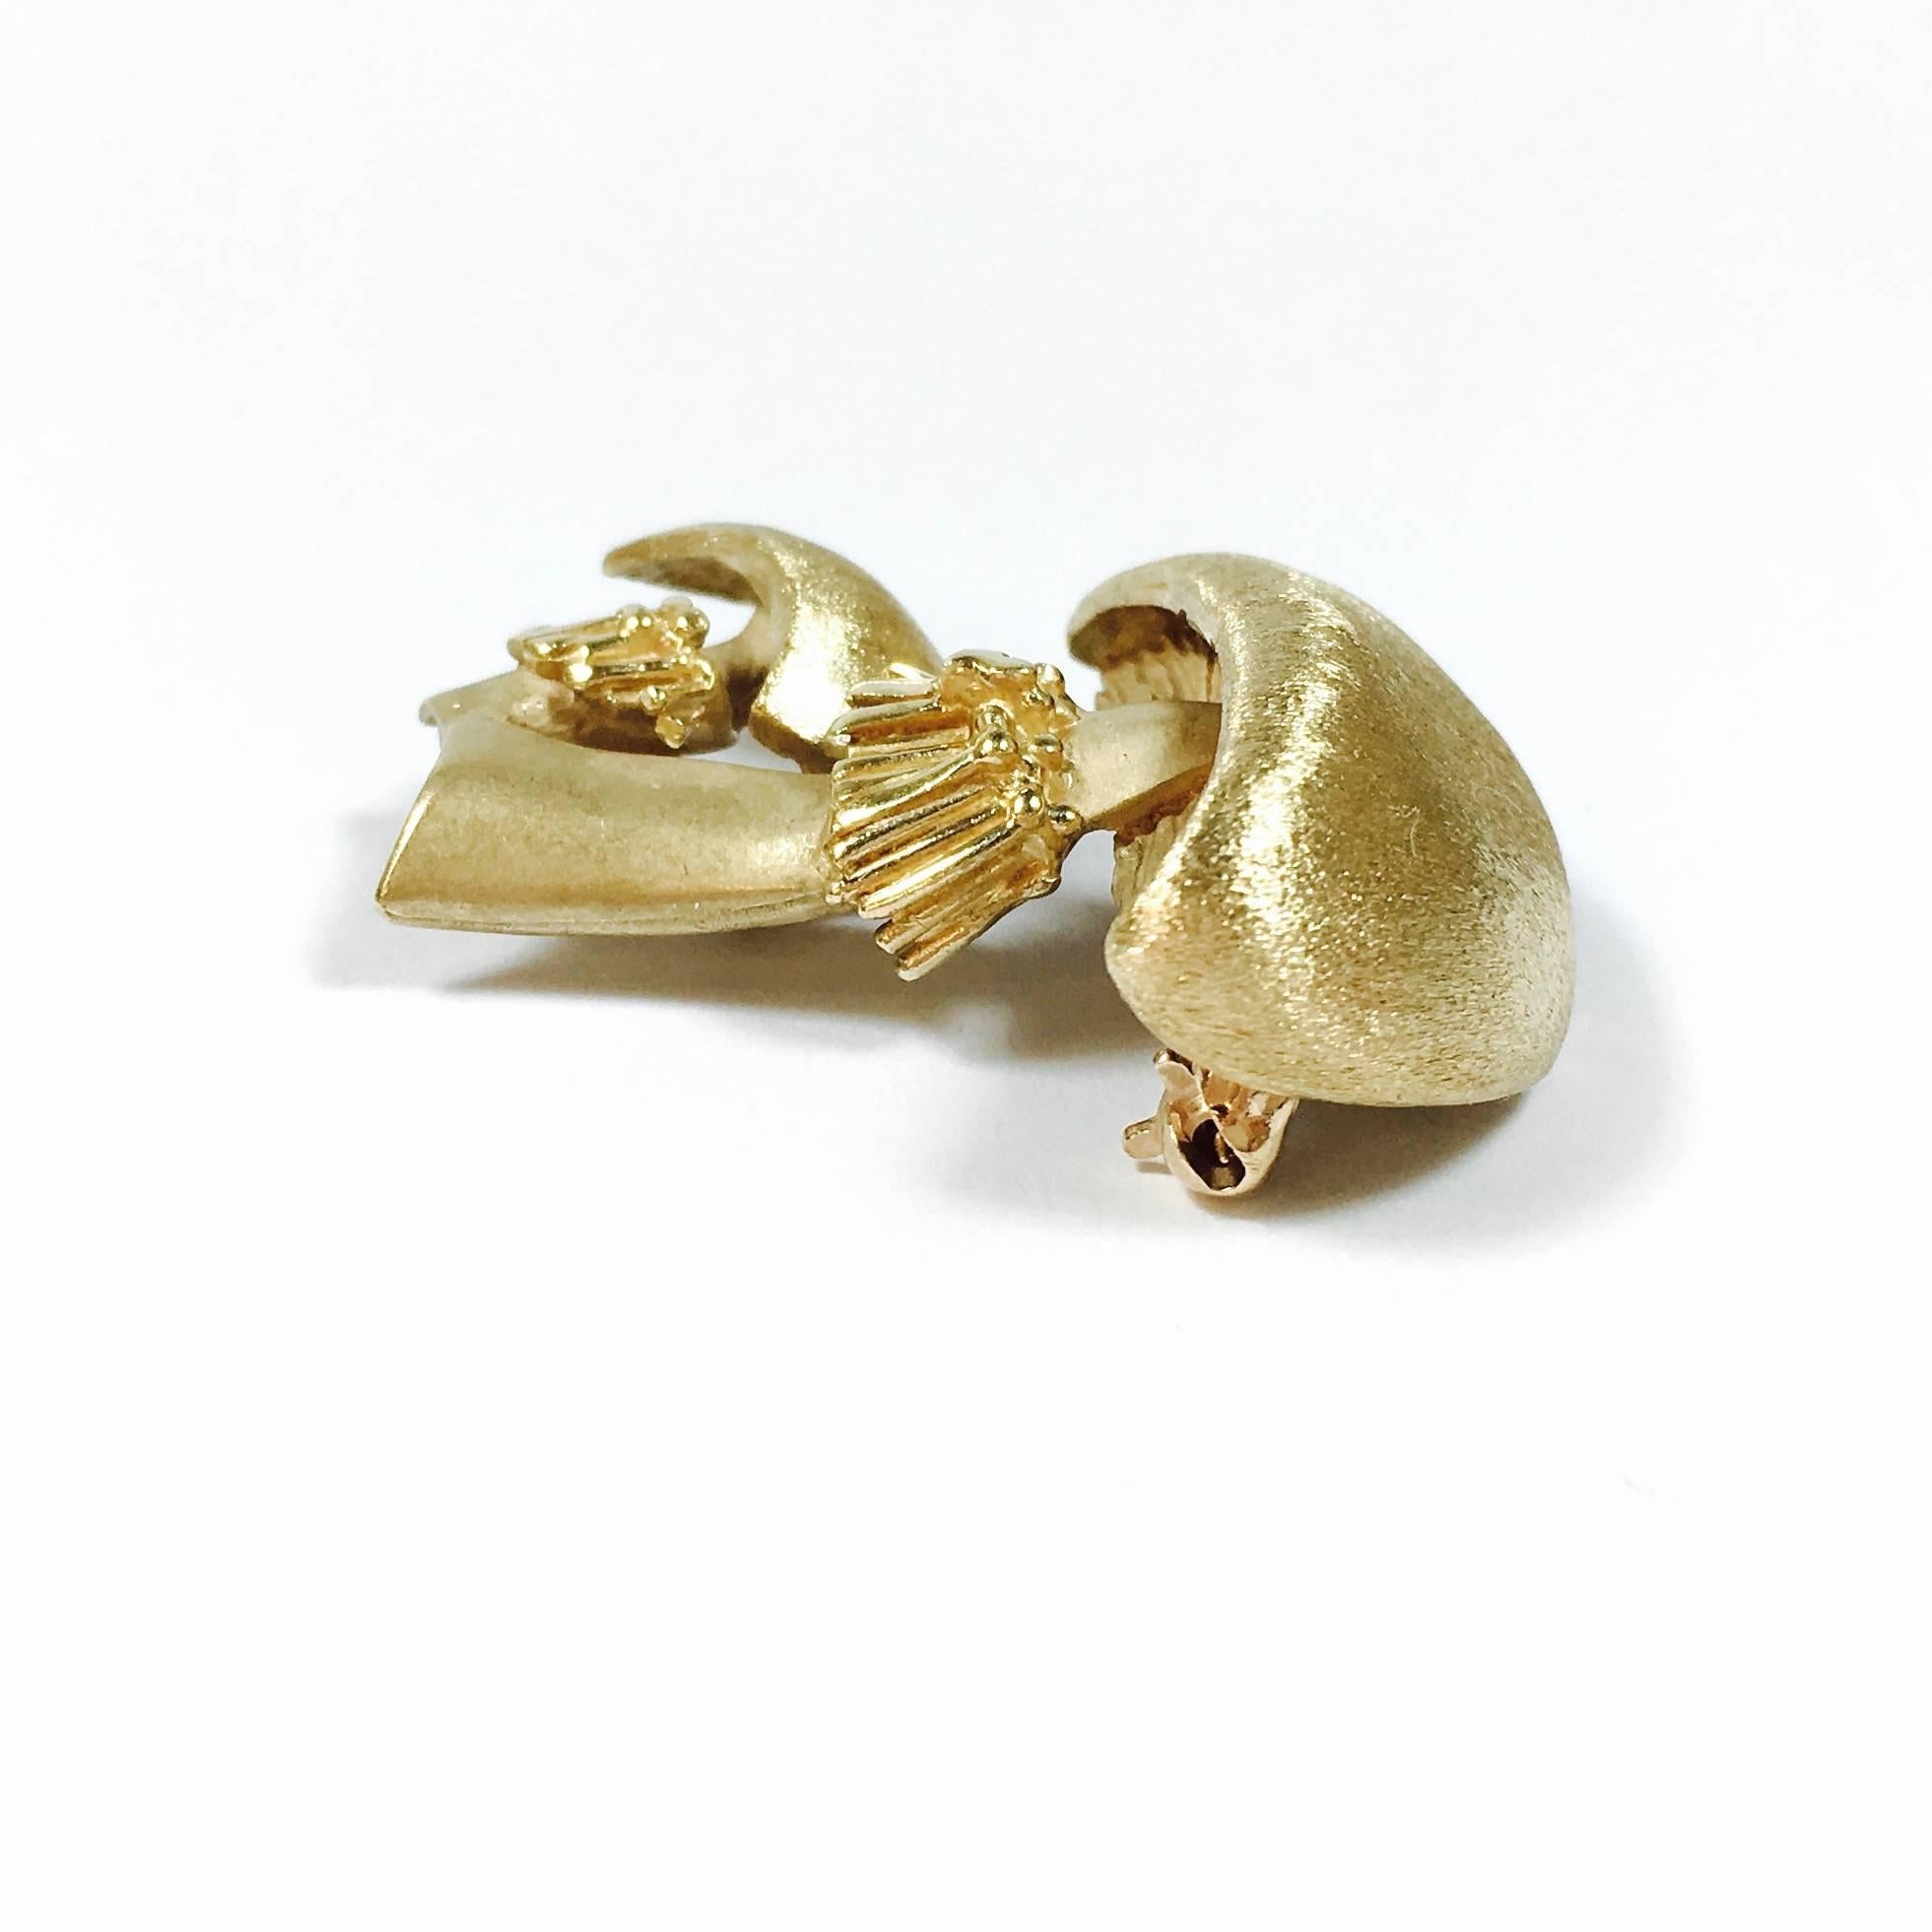 14K yellow gold double mushroom pin with a combination of satin, mat and polished finish. Circa 1970's. 
Measurements: 
30 mm H x 25 mm W
Weight: 9.4 grams
